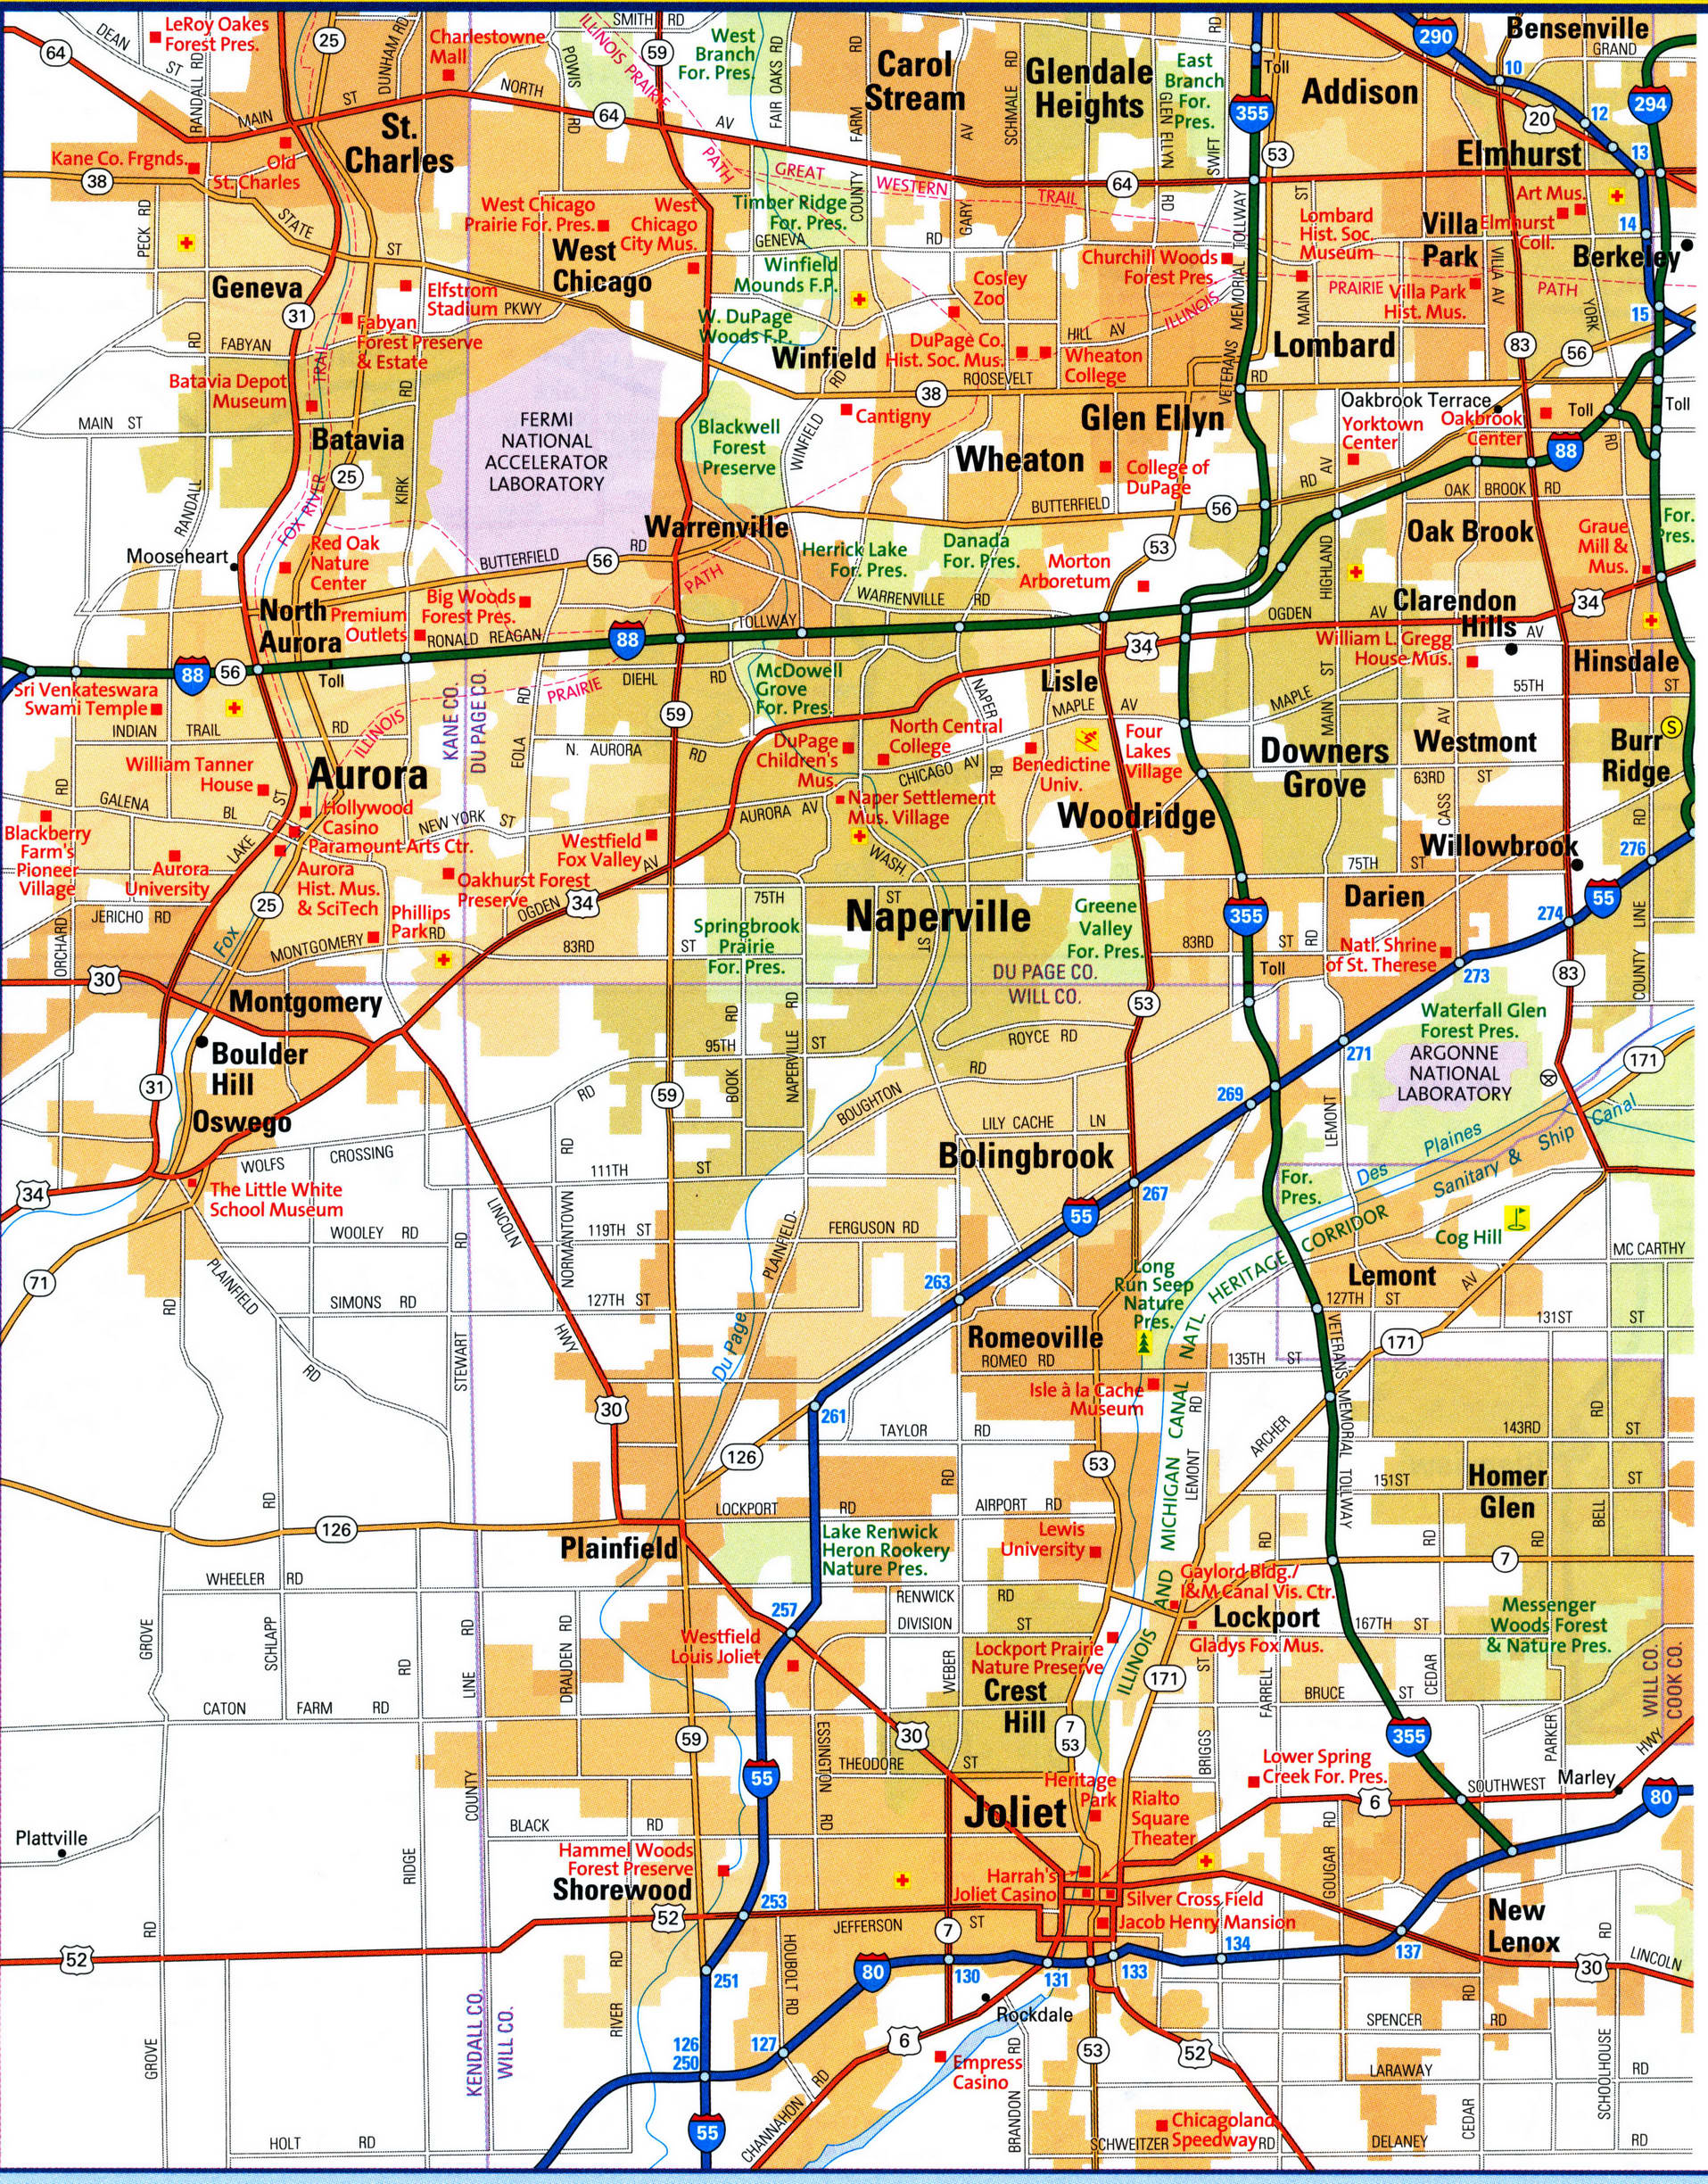 South Chicago city map